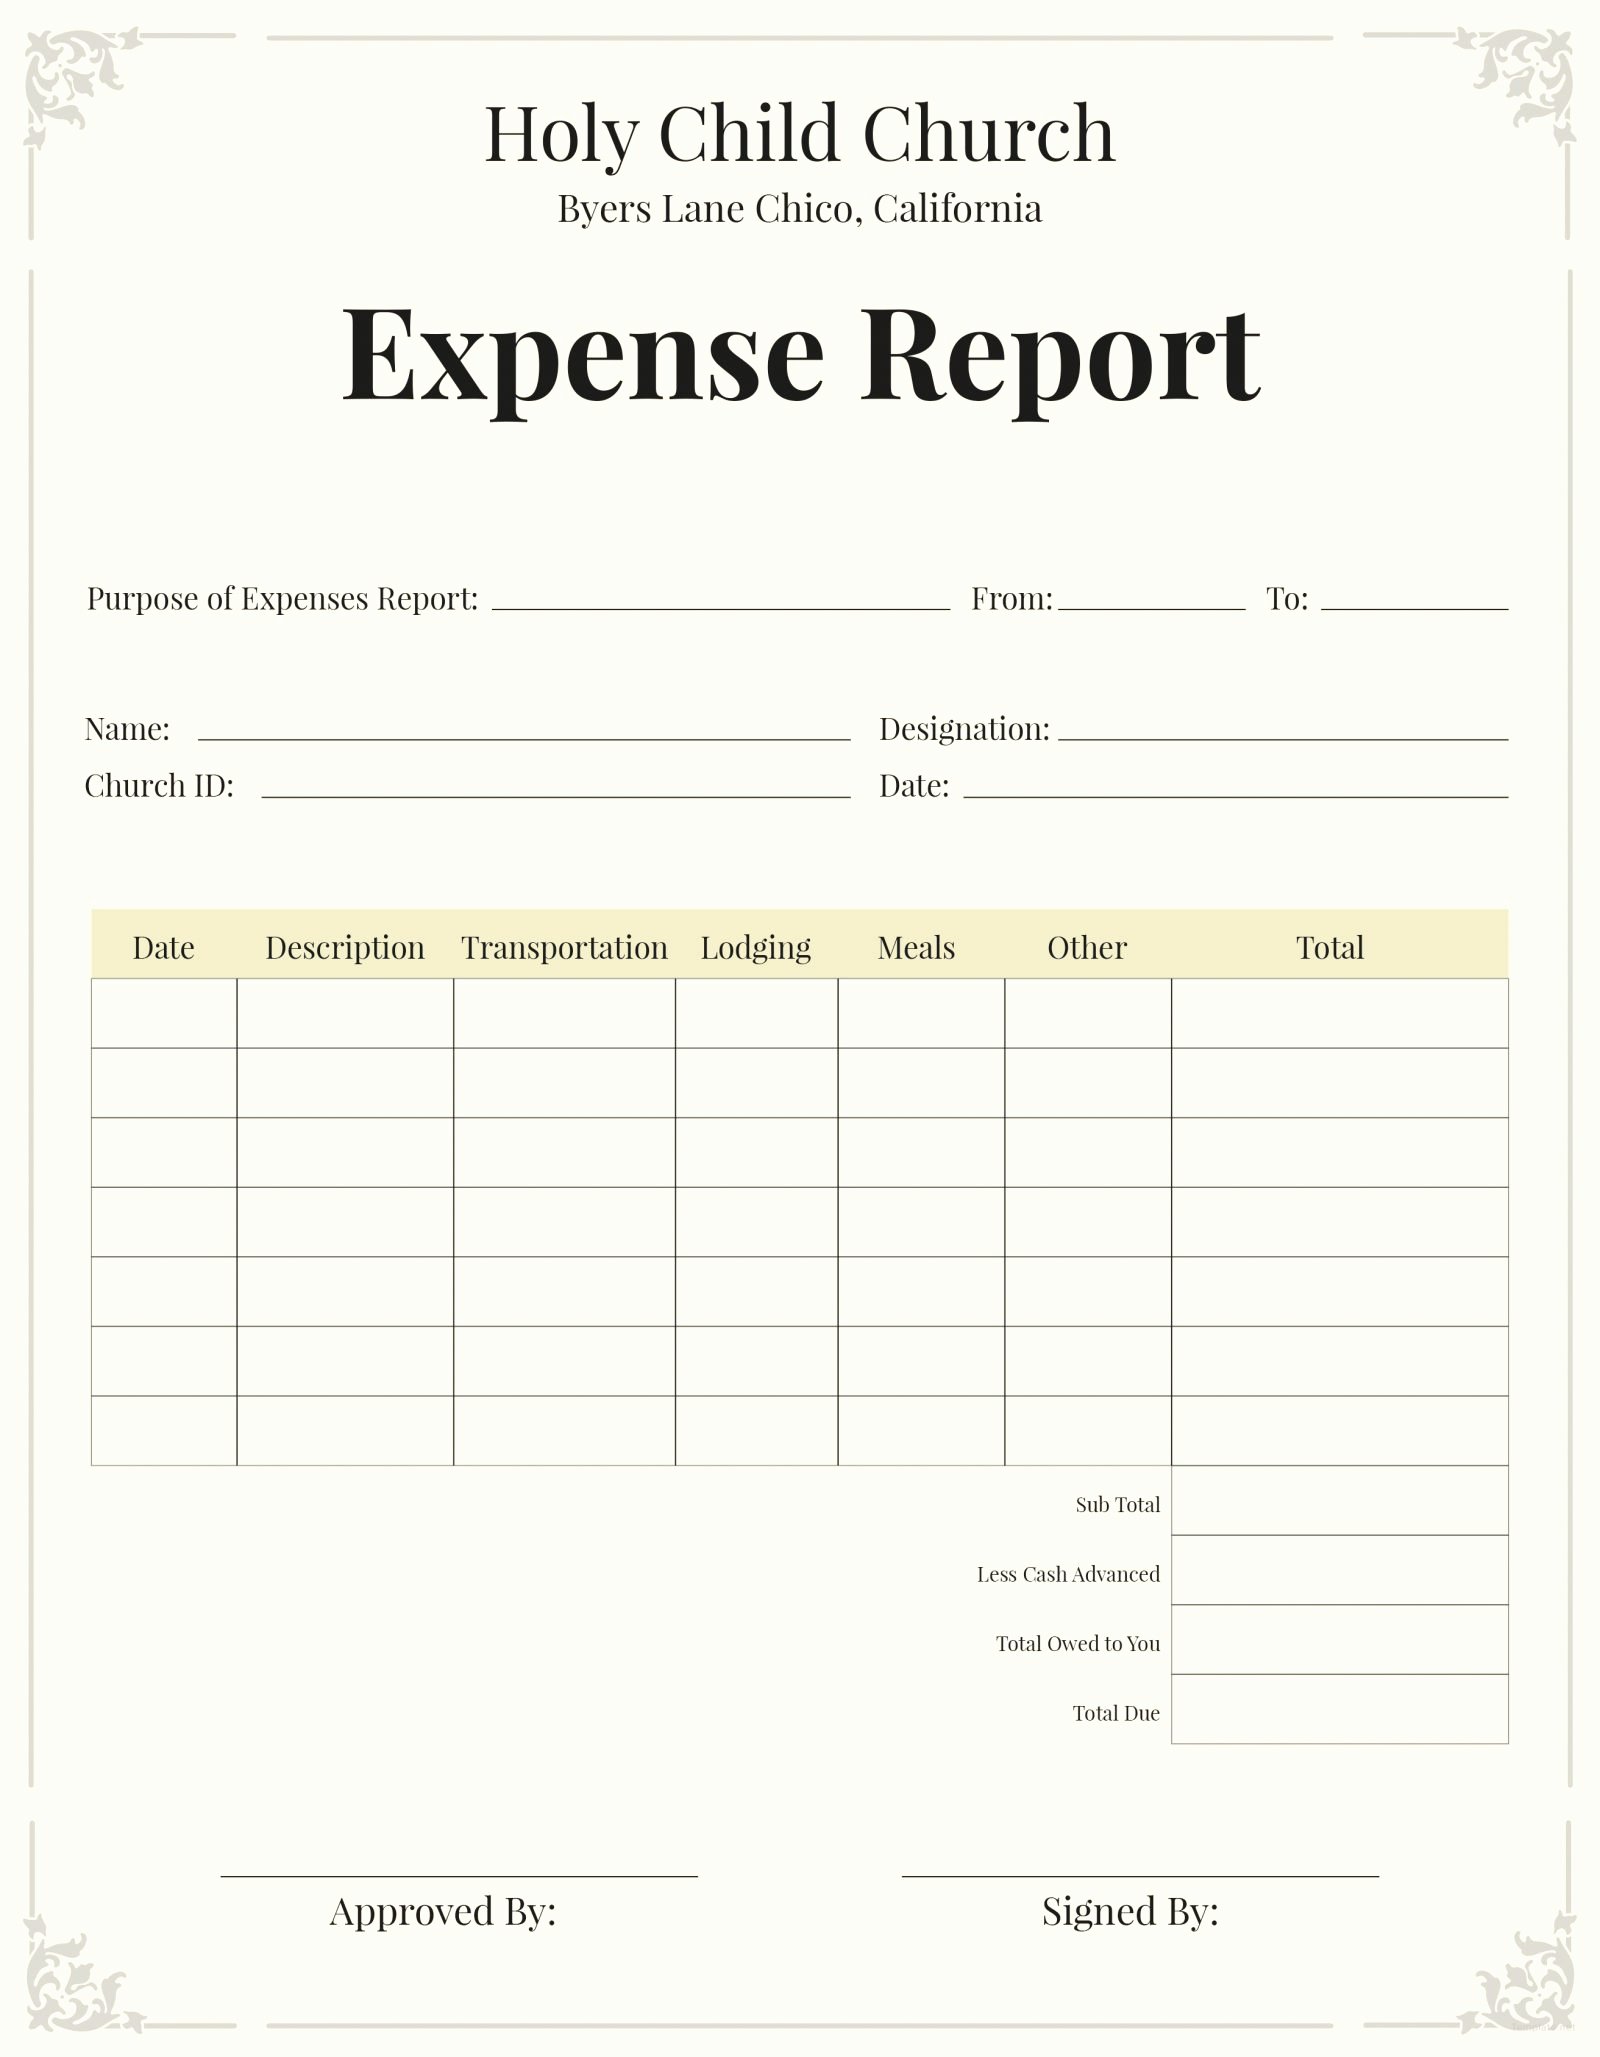 Church Annual Report Template Beautiful Church Monthly Financial Reporte Excel Example Annual